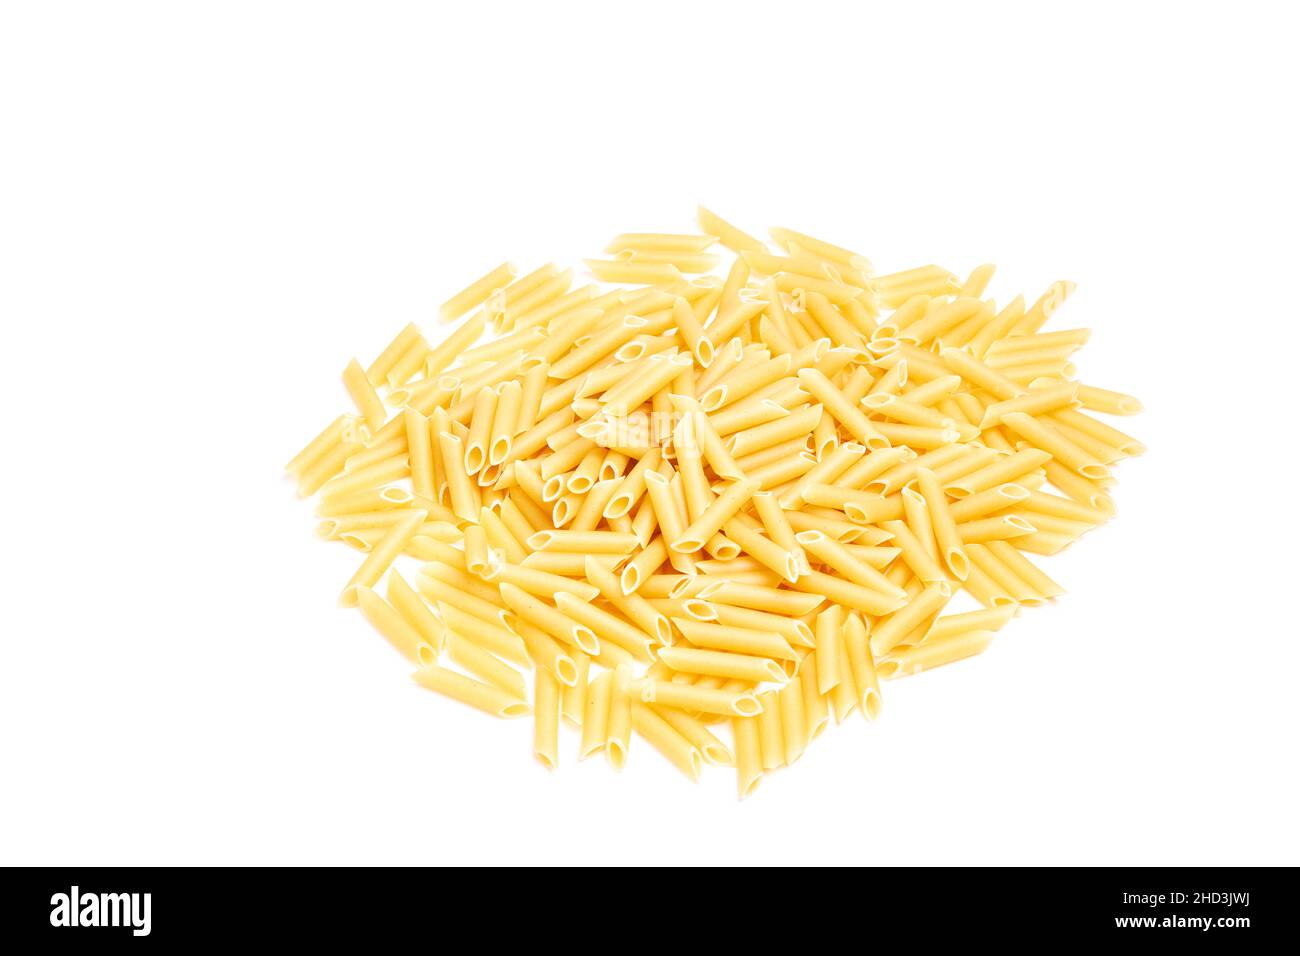 Pile of raw macaroni on a white background. Healthy food Stock Photo